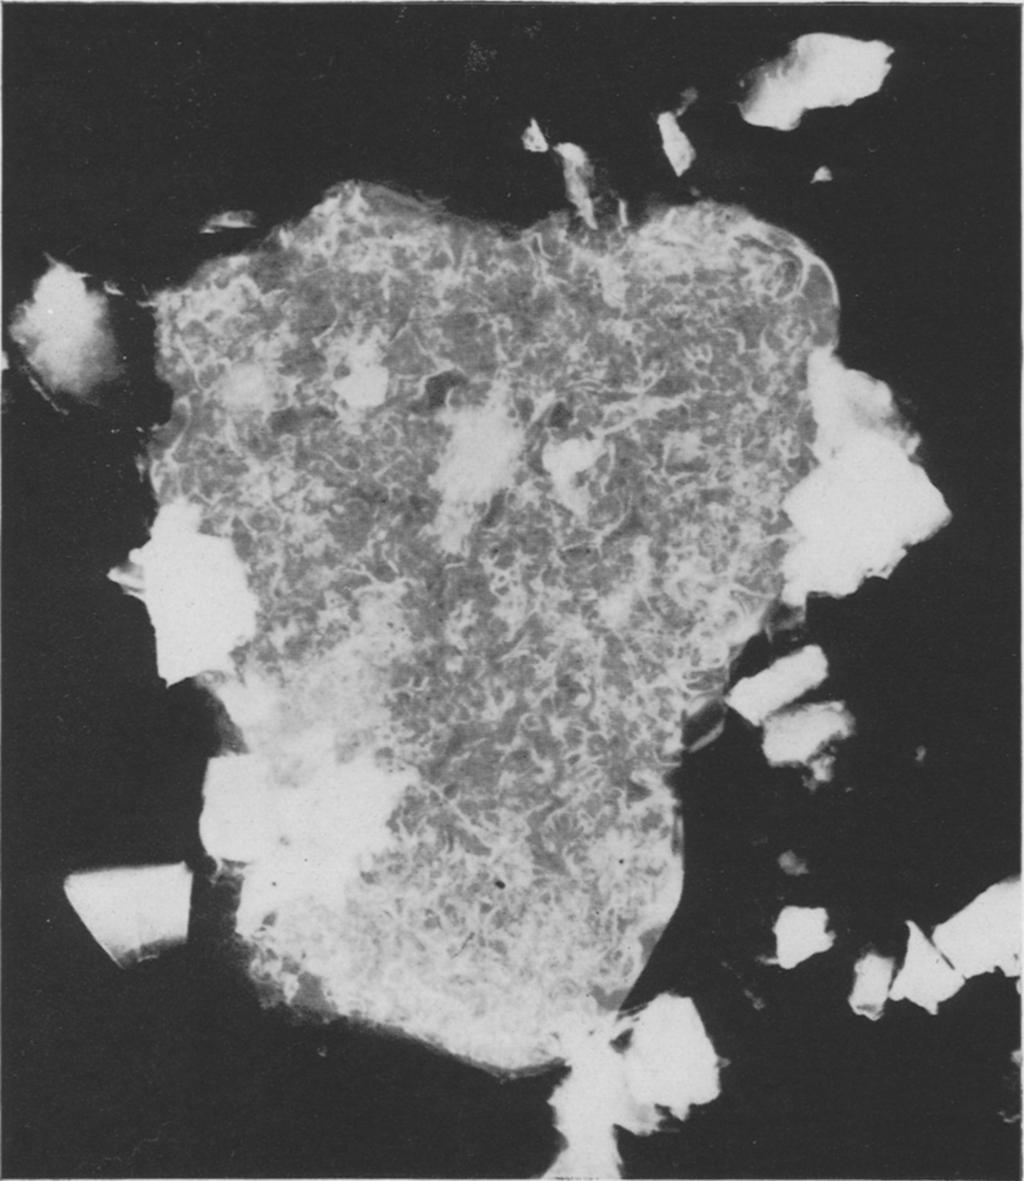 PLATE 1. Clays forming within feldspar.